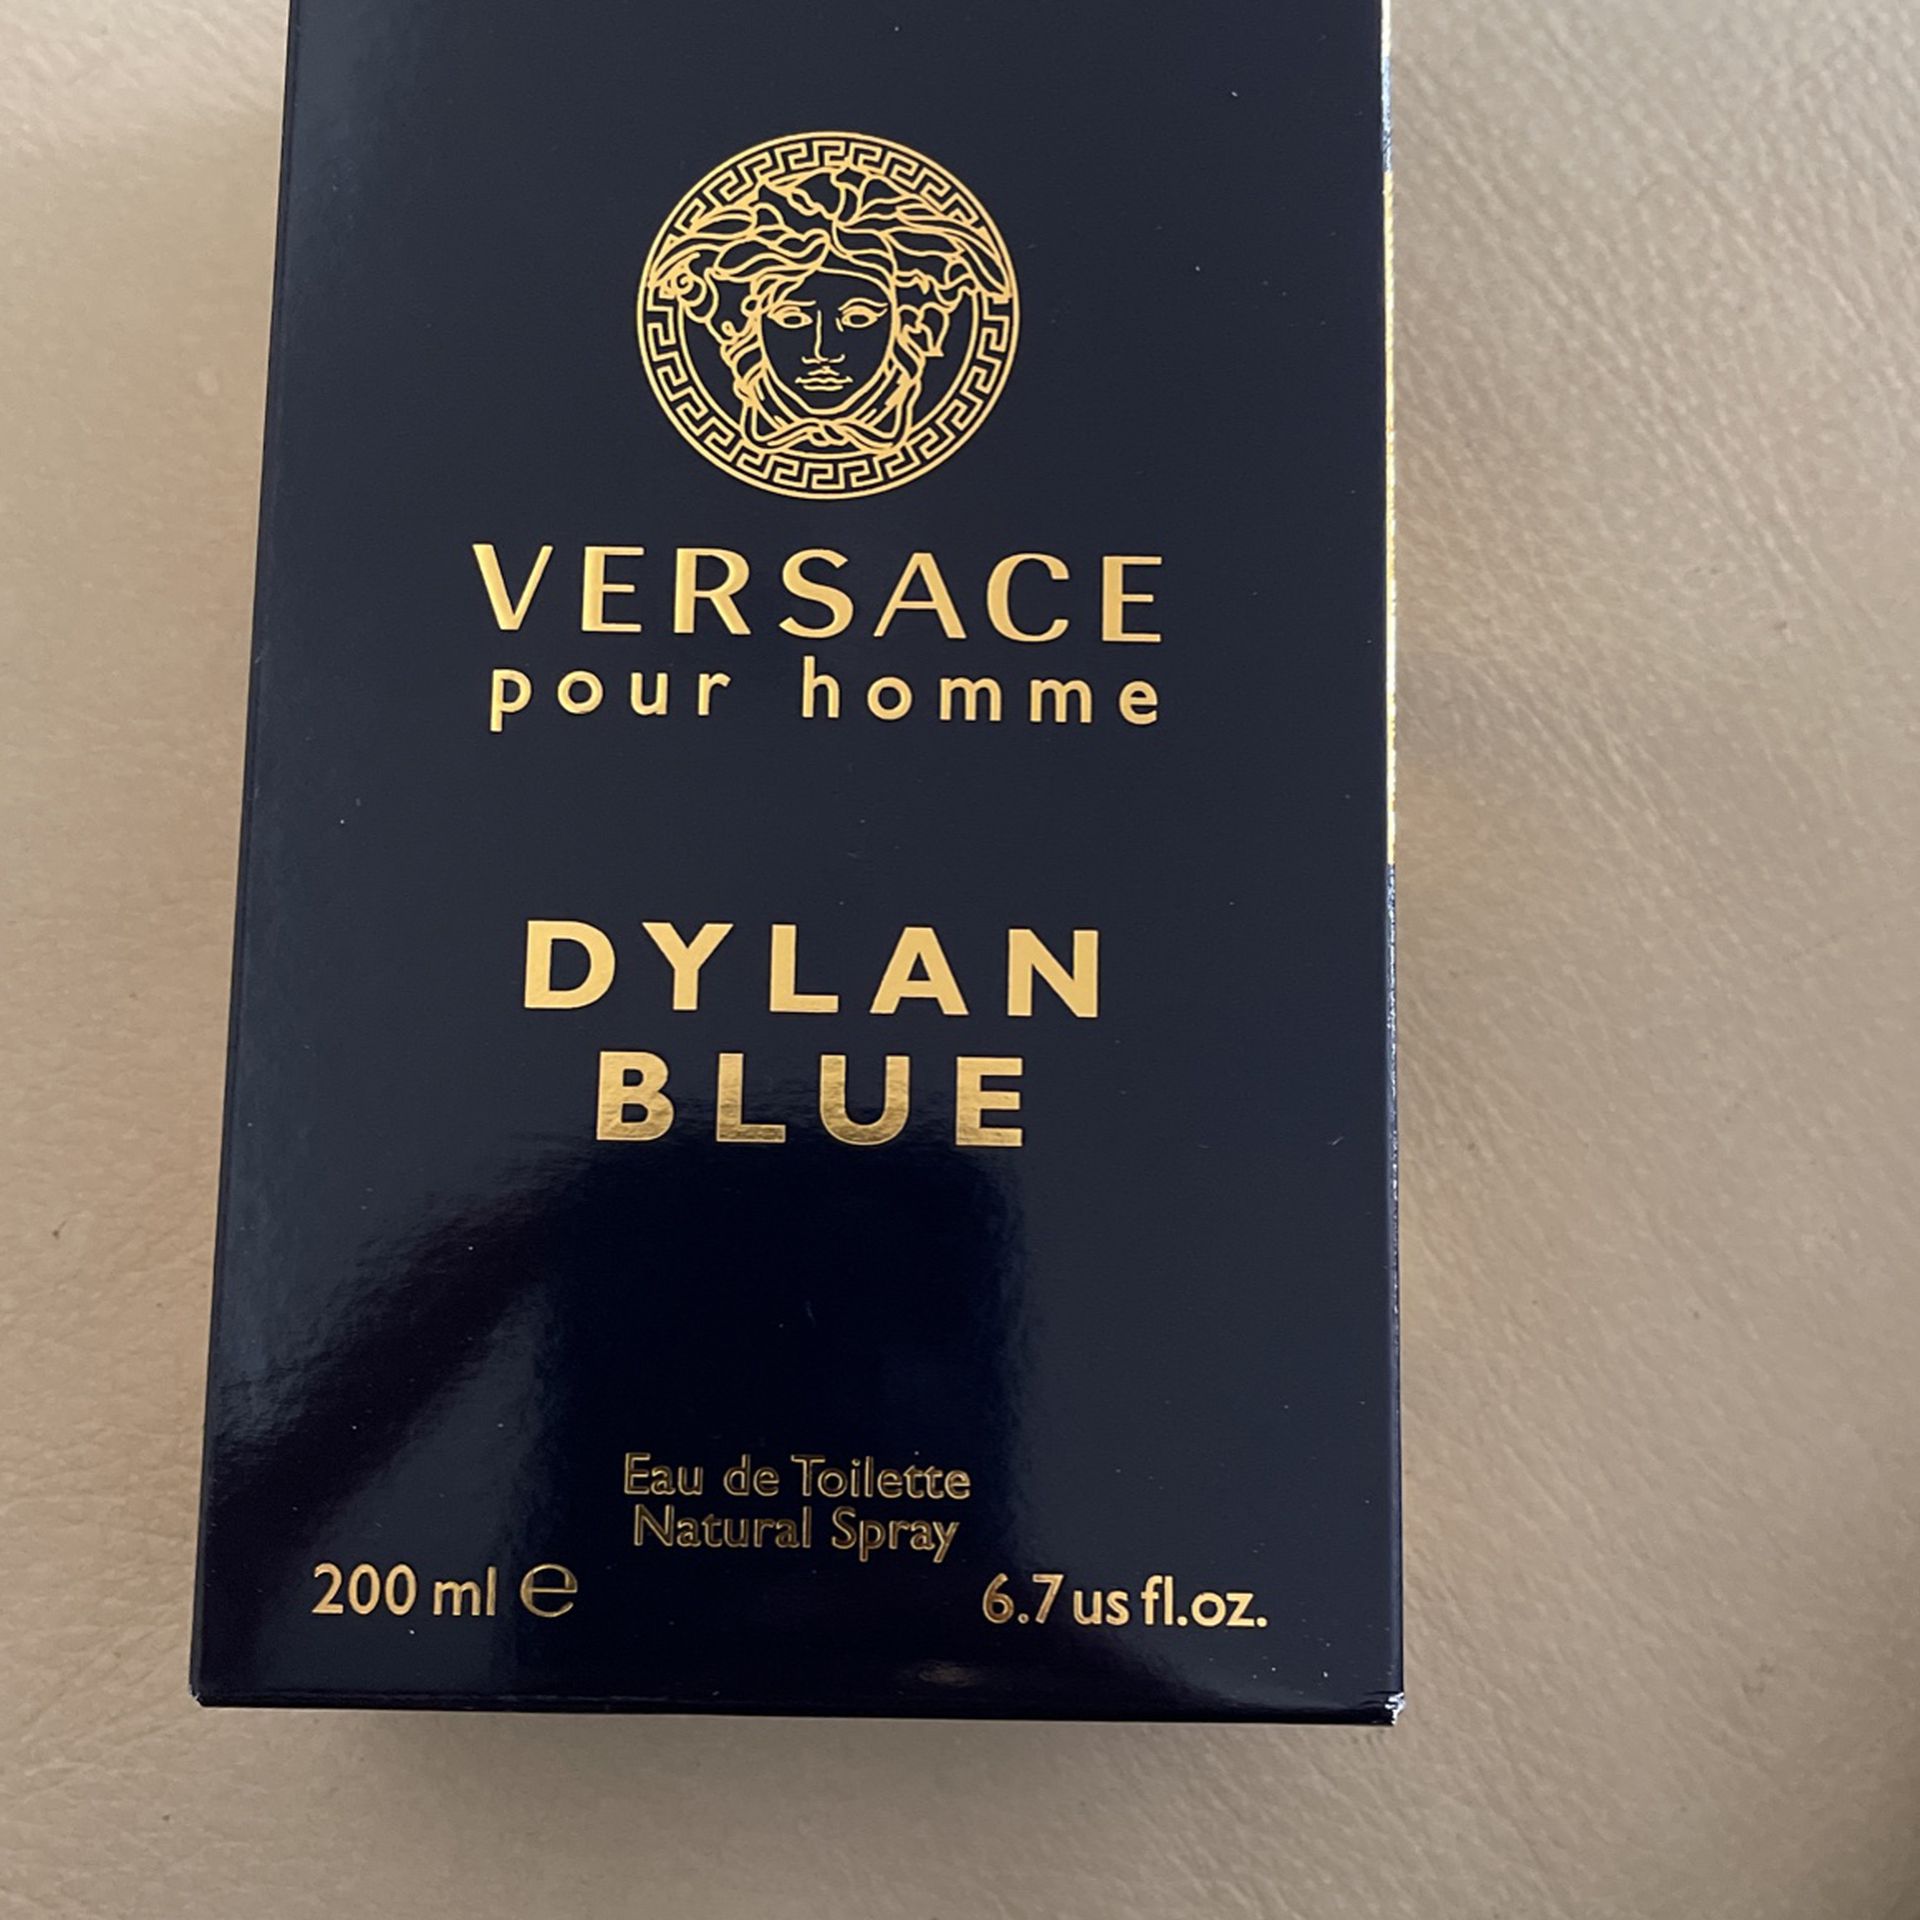 Versace Dylan Blue 200ml for Sale in Johns Creek, GA - OfferUp